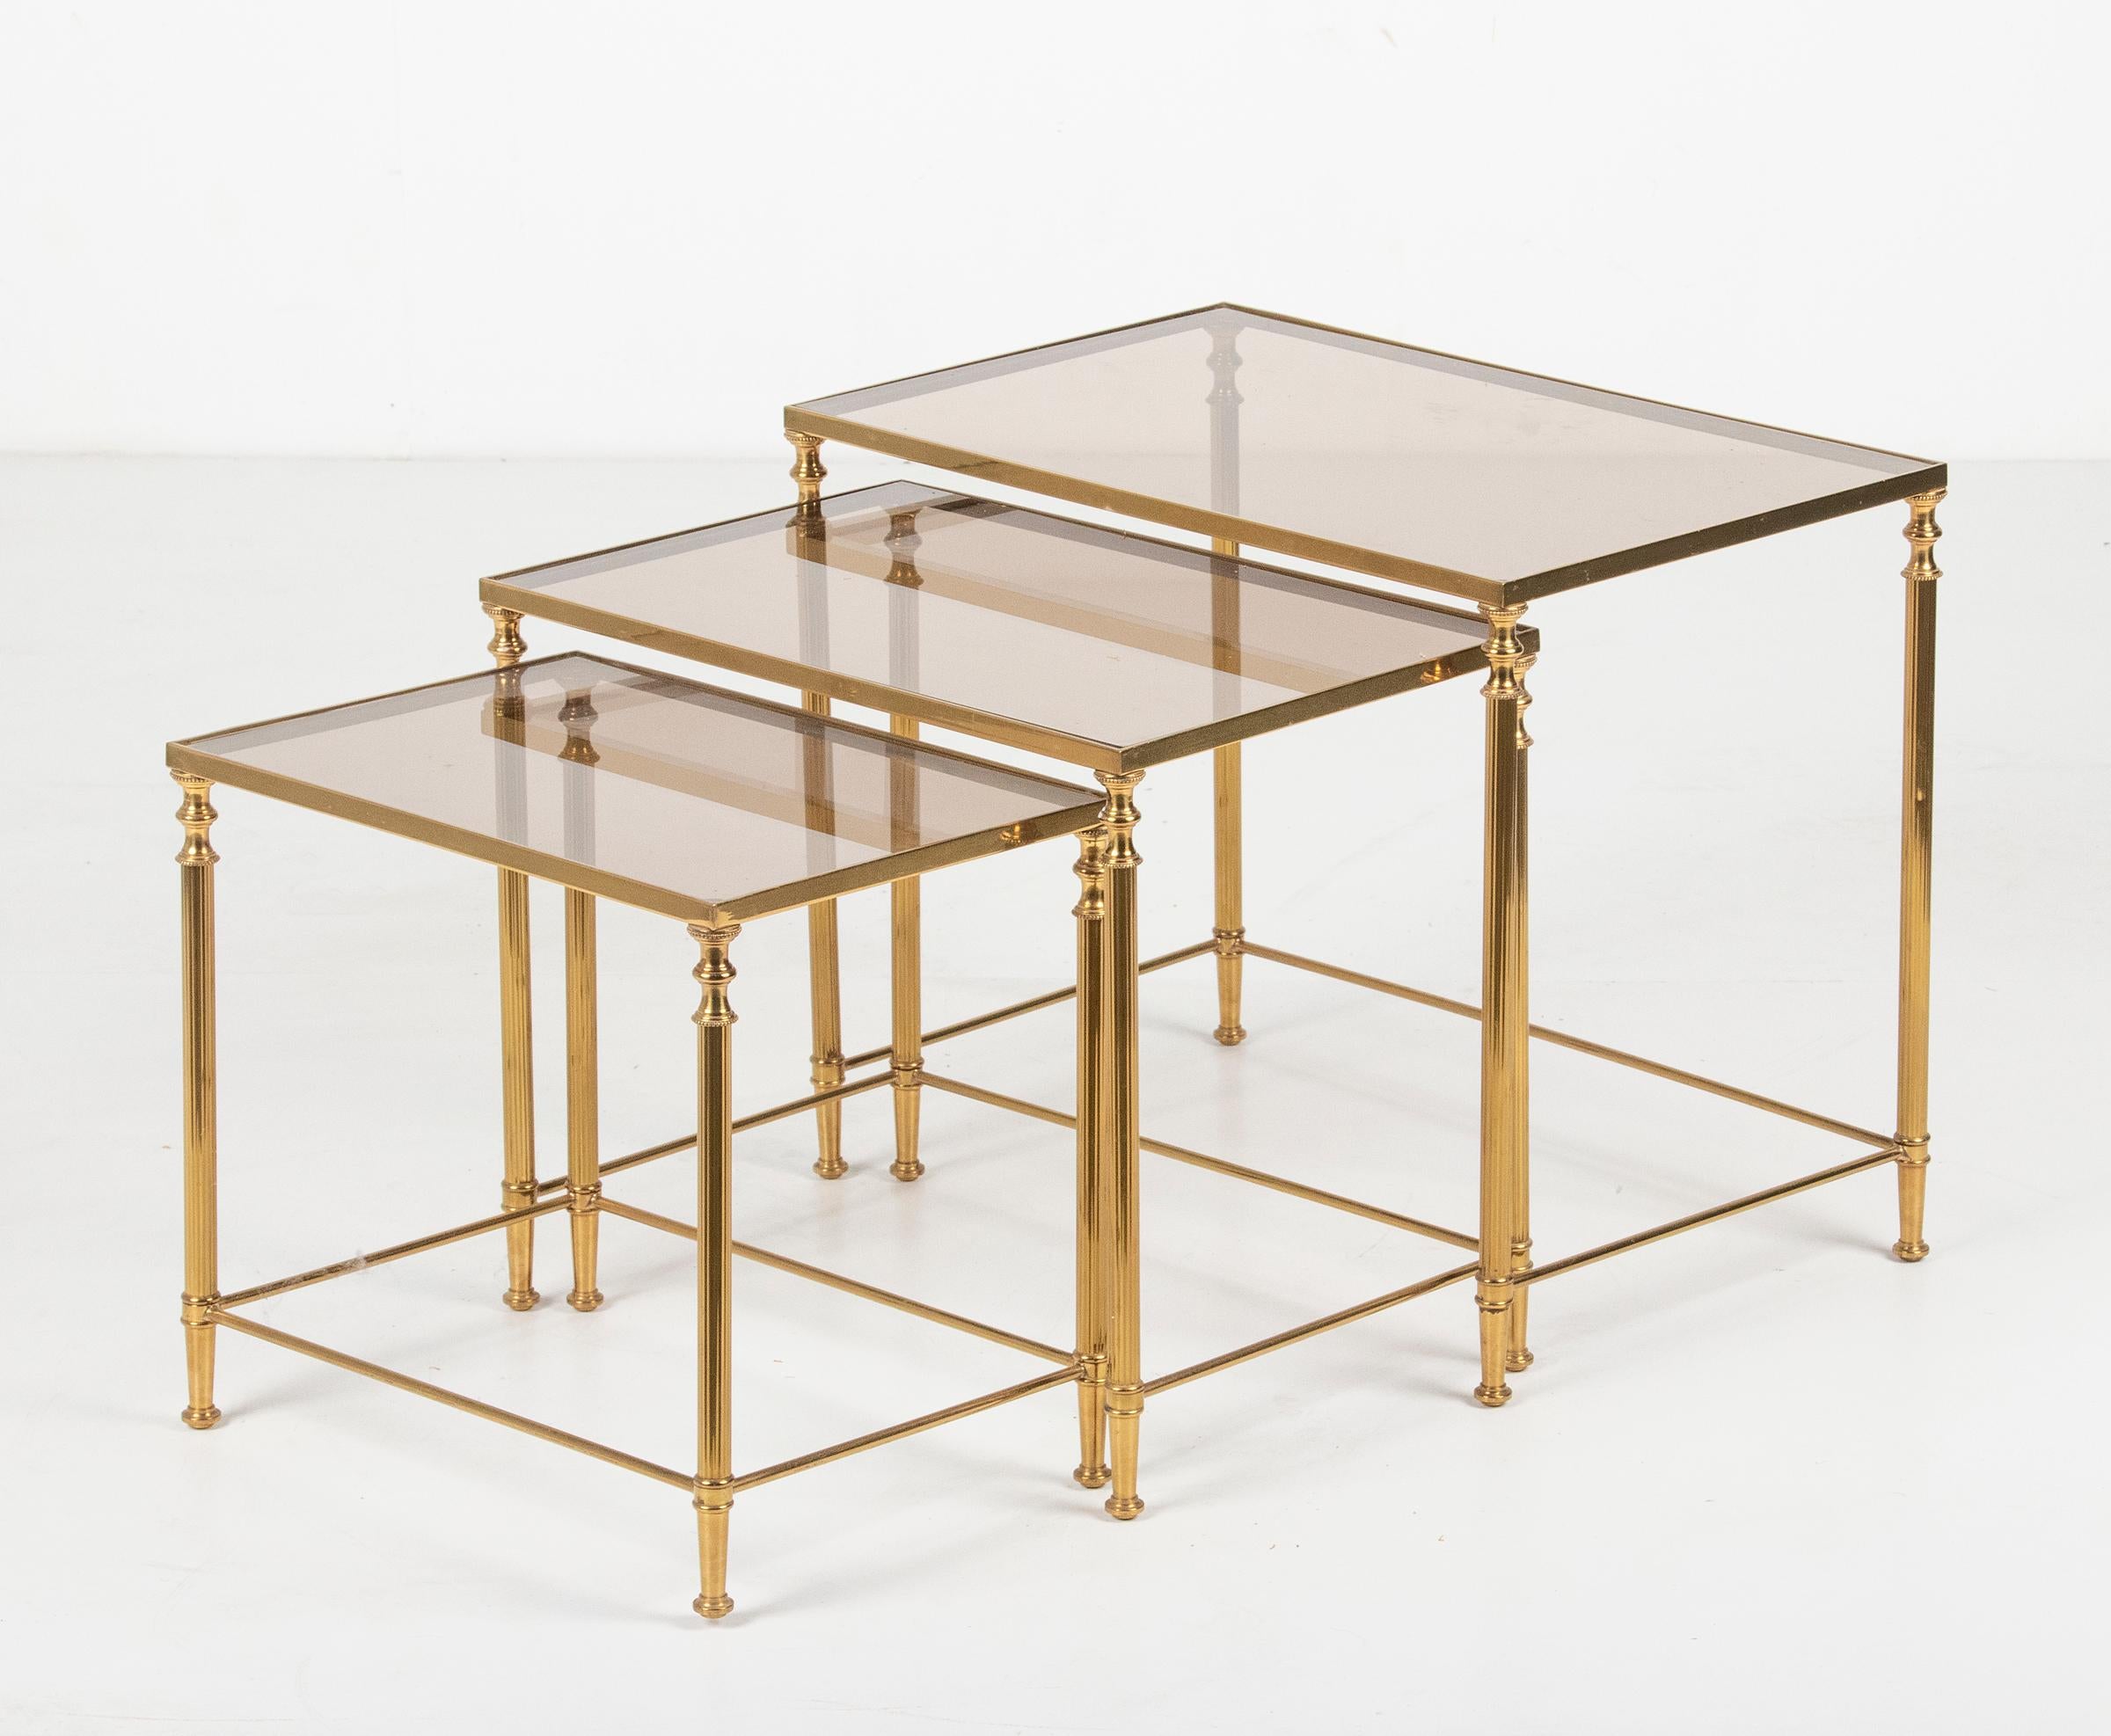 A set of three Hollywood Regency Brass nesting tables, with smoked glass tops. Resting on polished brass frames. Made in Belgium, circa 1960-1970. In very good vintage condition

Dimensions big: 43 x 54 x 33 cm
Dimensions middle: 39 x 45 x 30